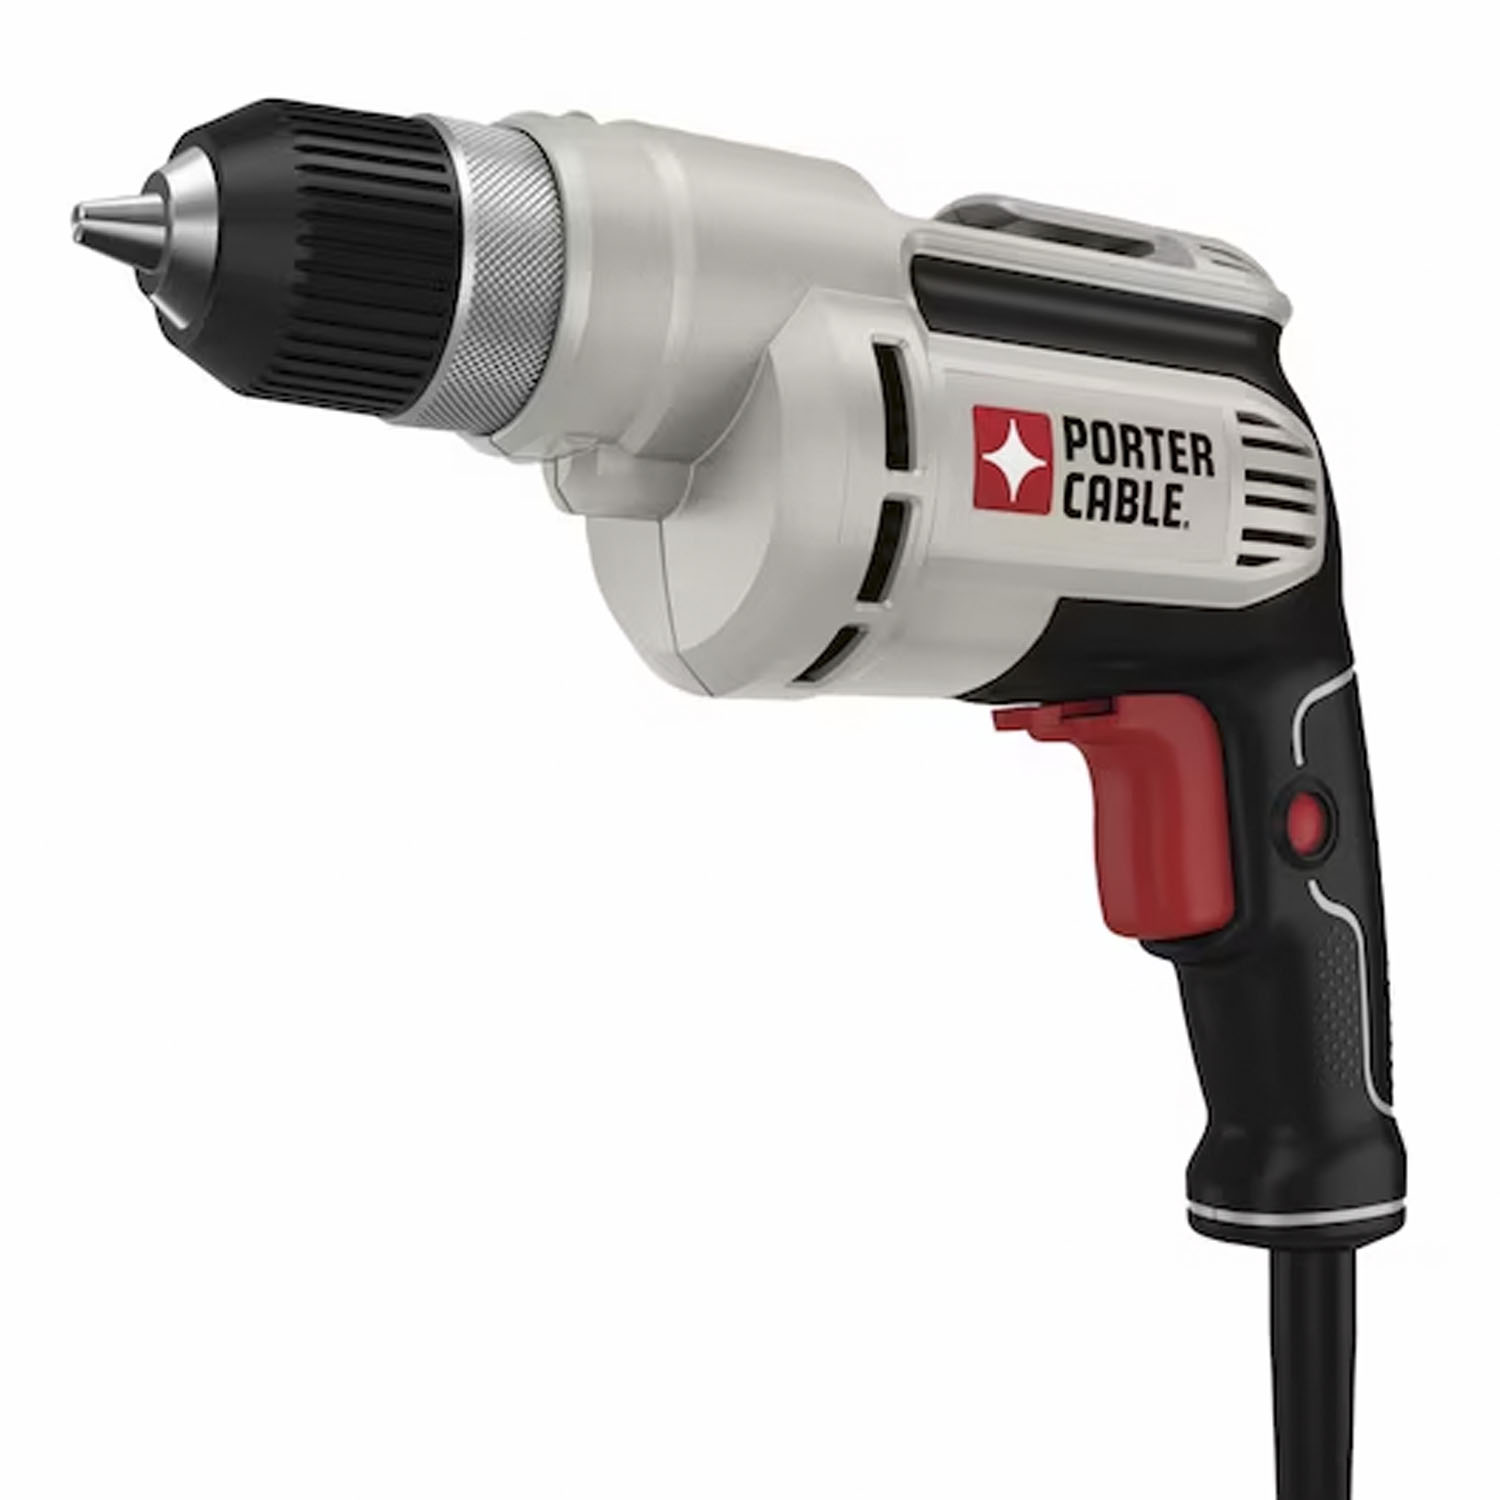 6.0 AMP PORTER CABLE 3/8 IN. DRILL